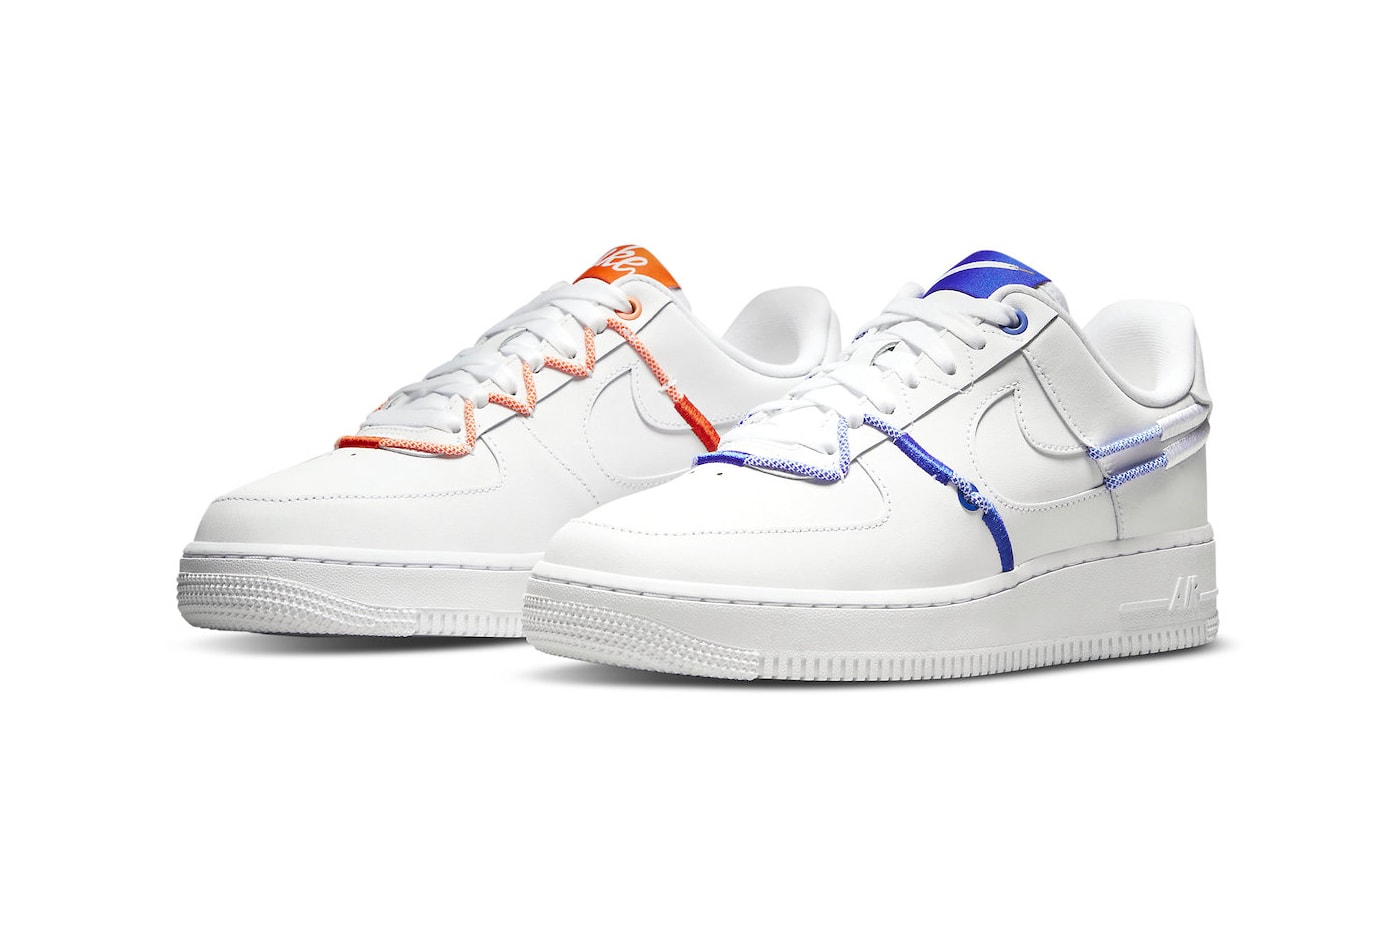 Nike Adds Lacing Details to Air Force 1 Low LX